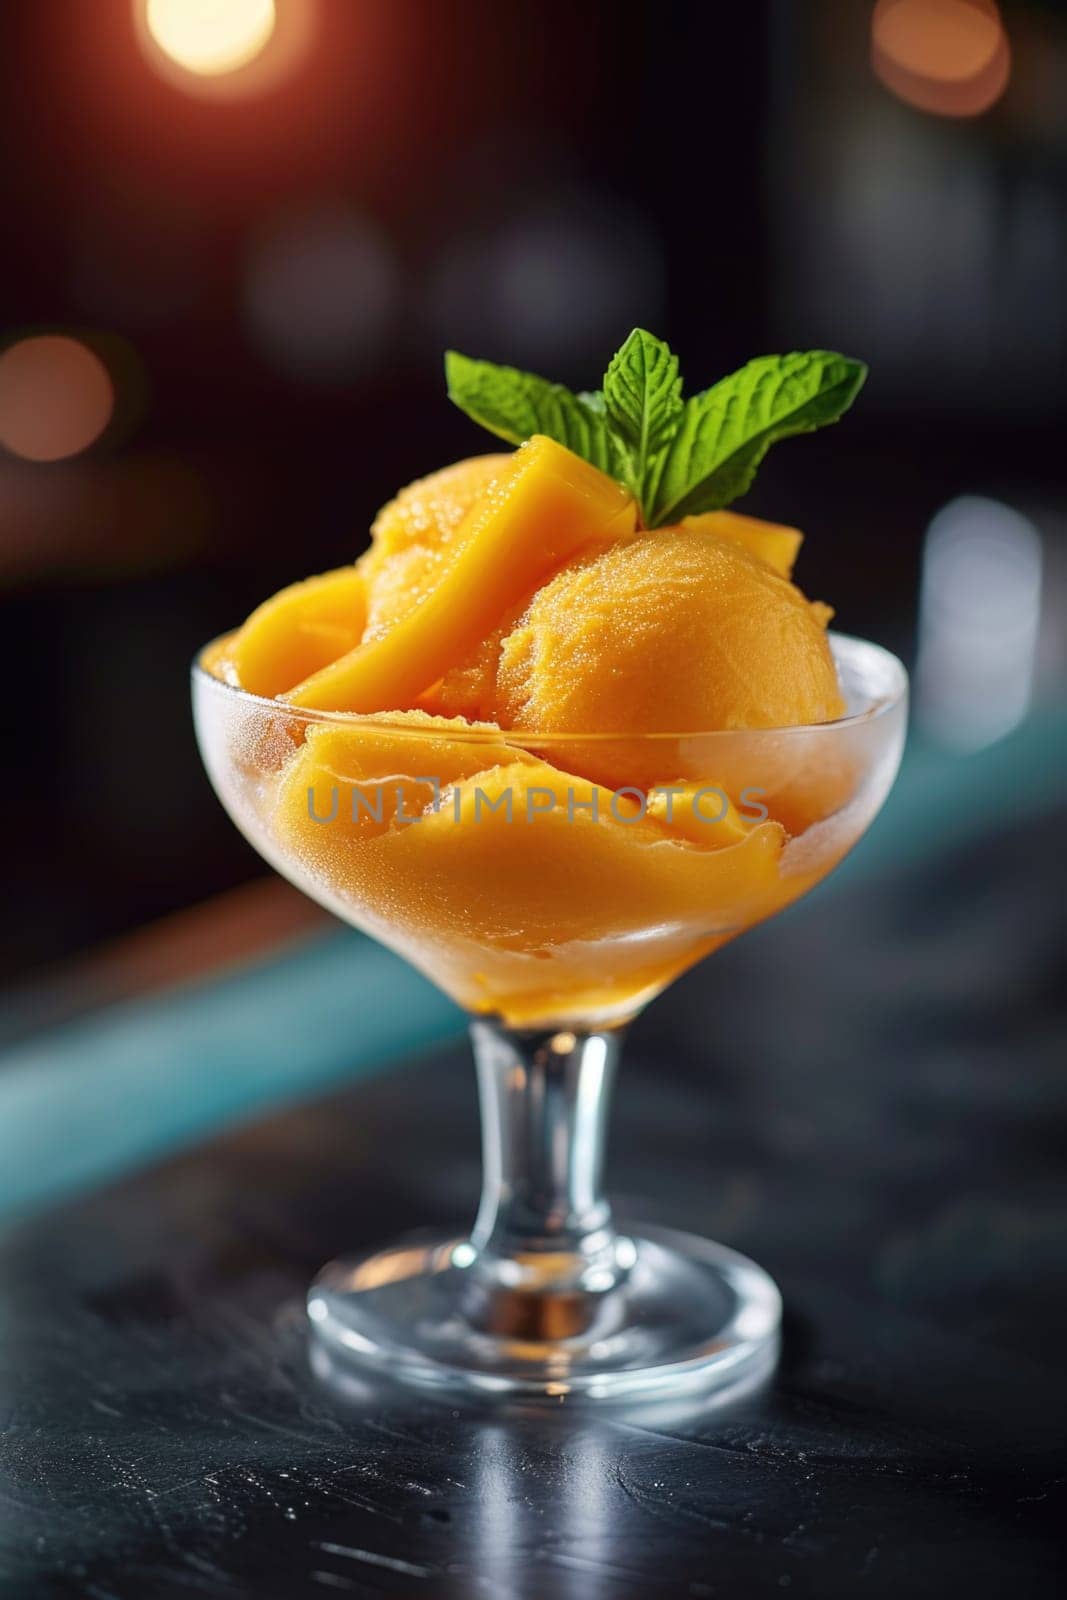 Mango sorbet in a glass on the table . Popsicle in a glass.